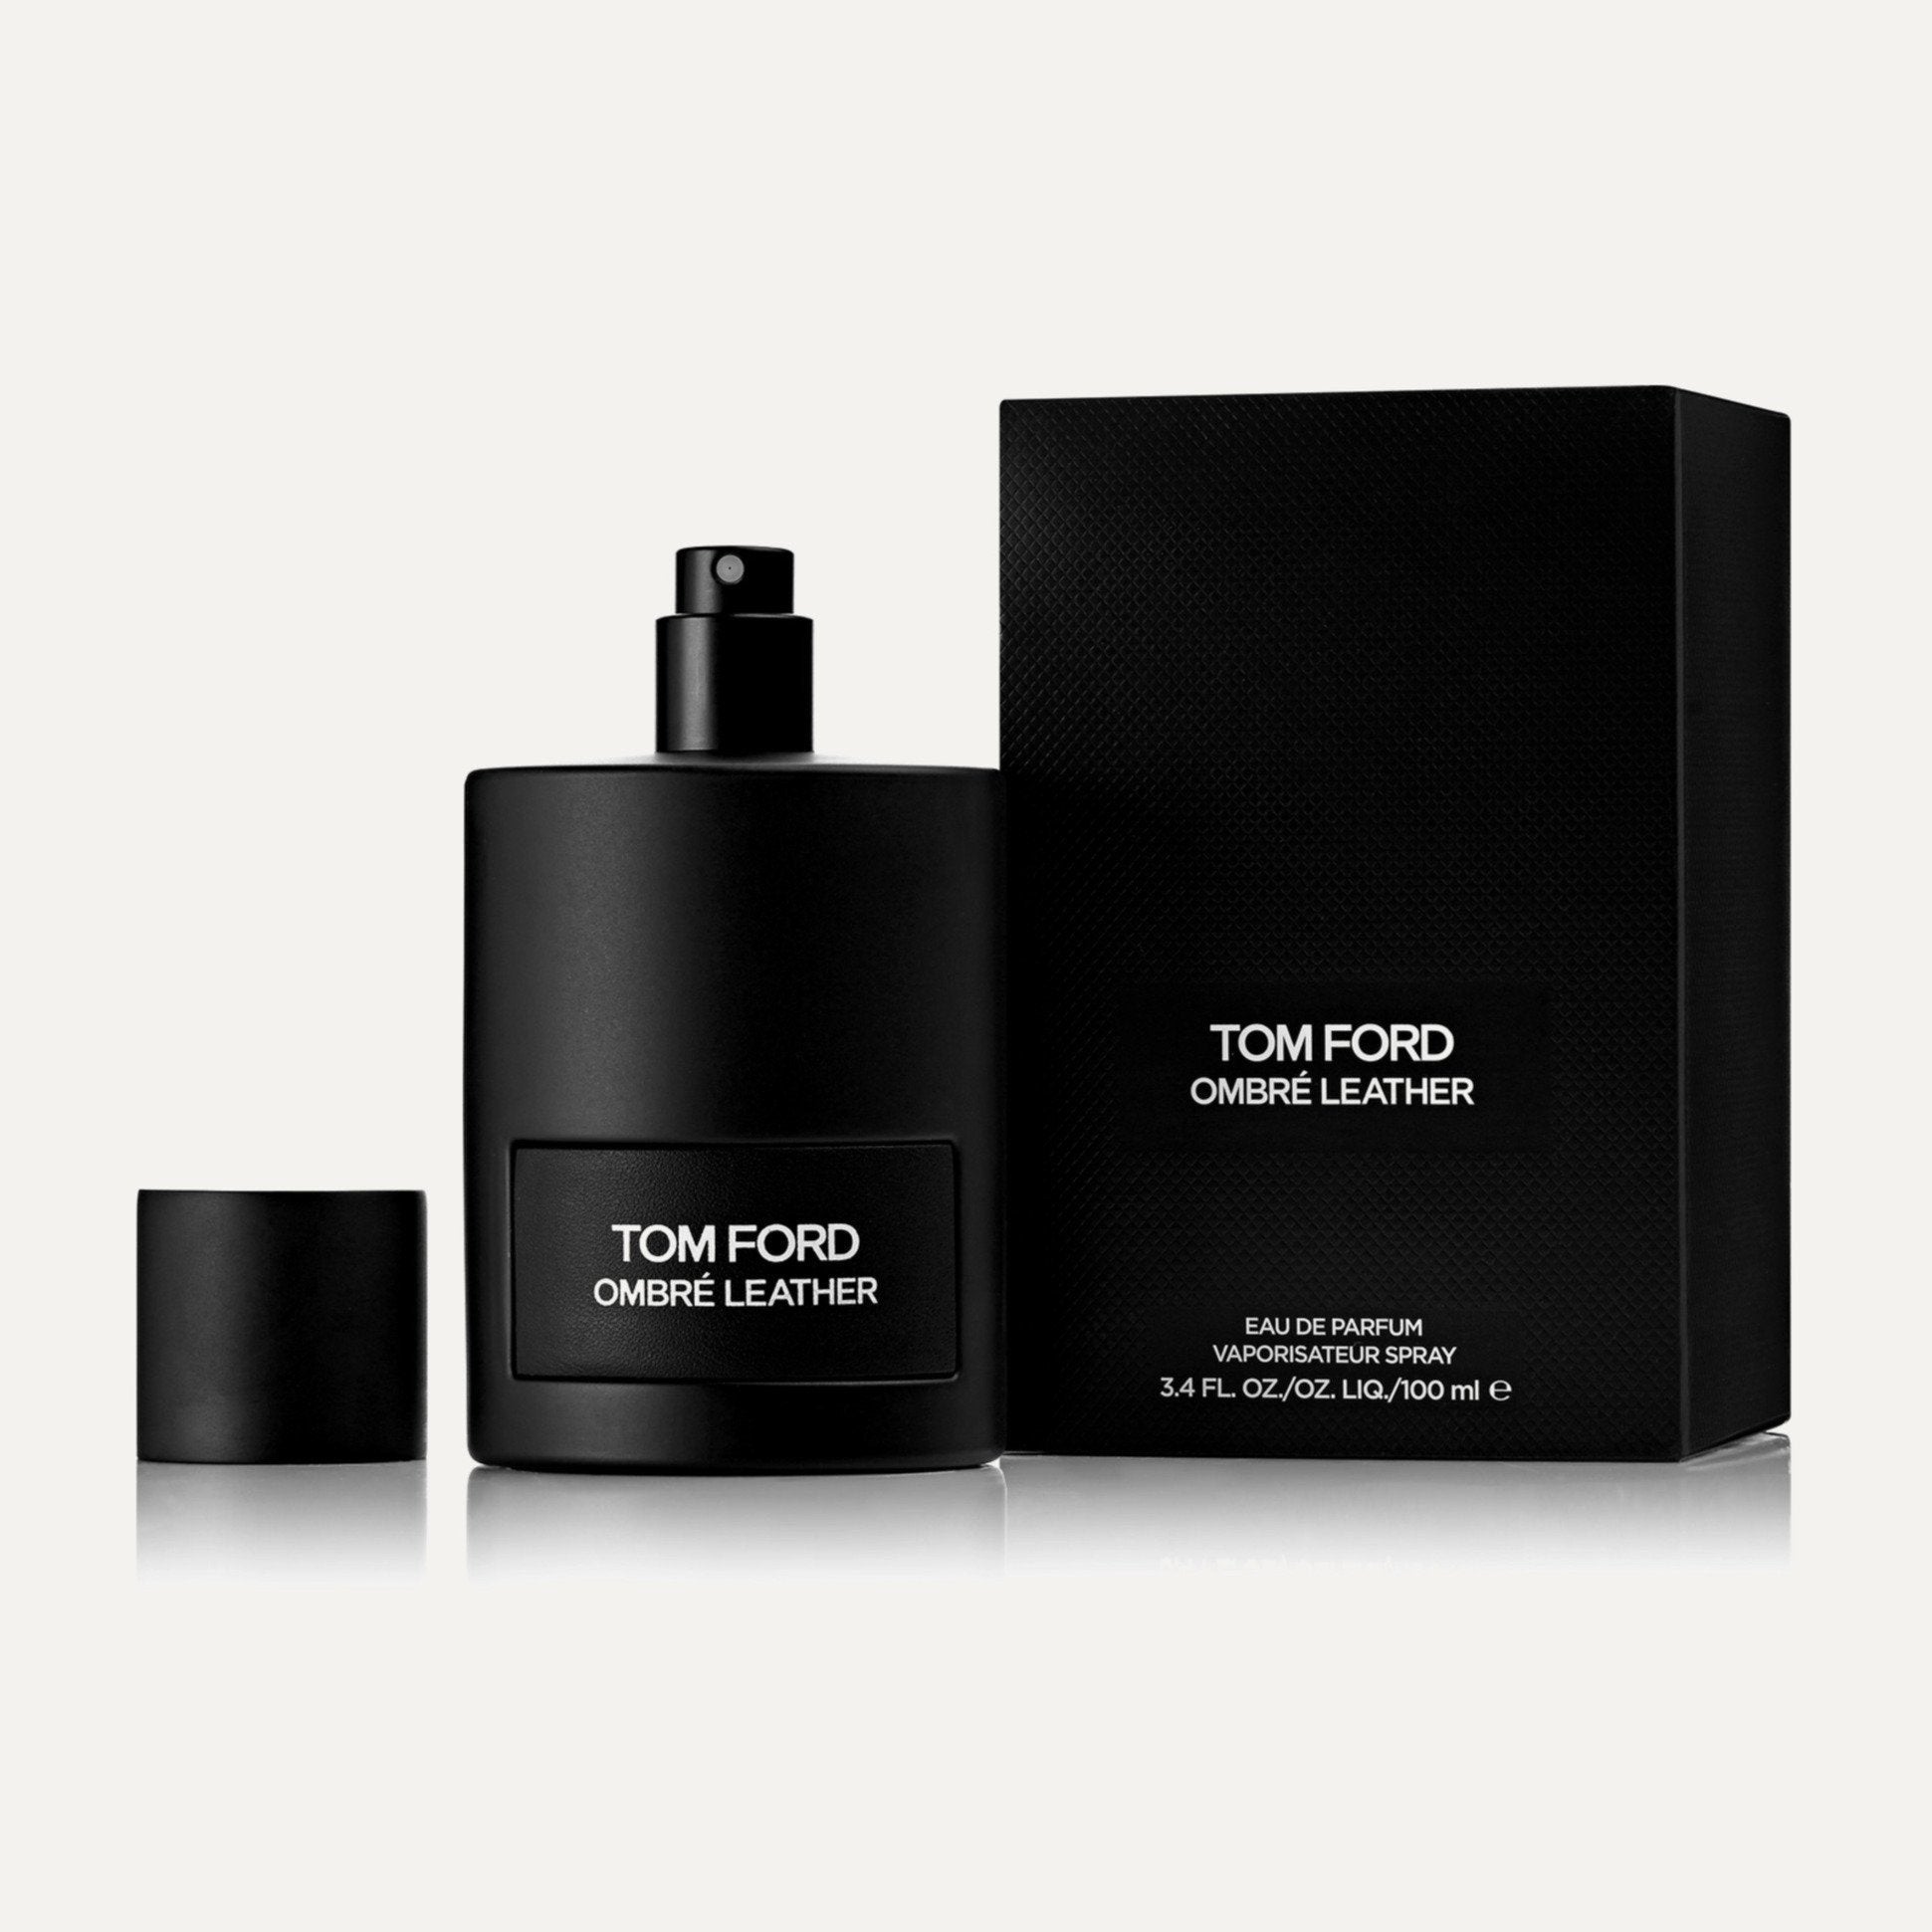 TOM FORD Ombre Leather Gift Set - My Perfume Shop Australia